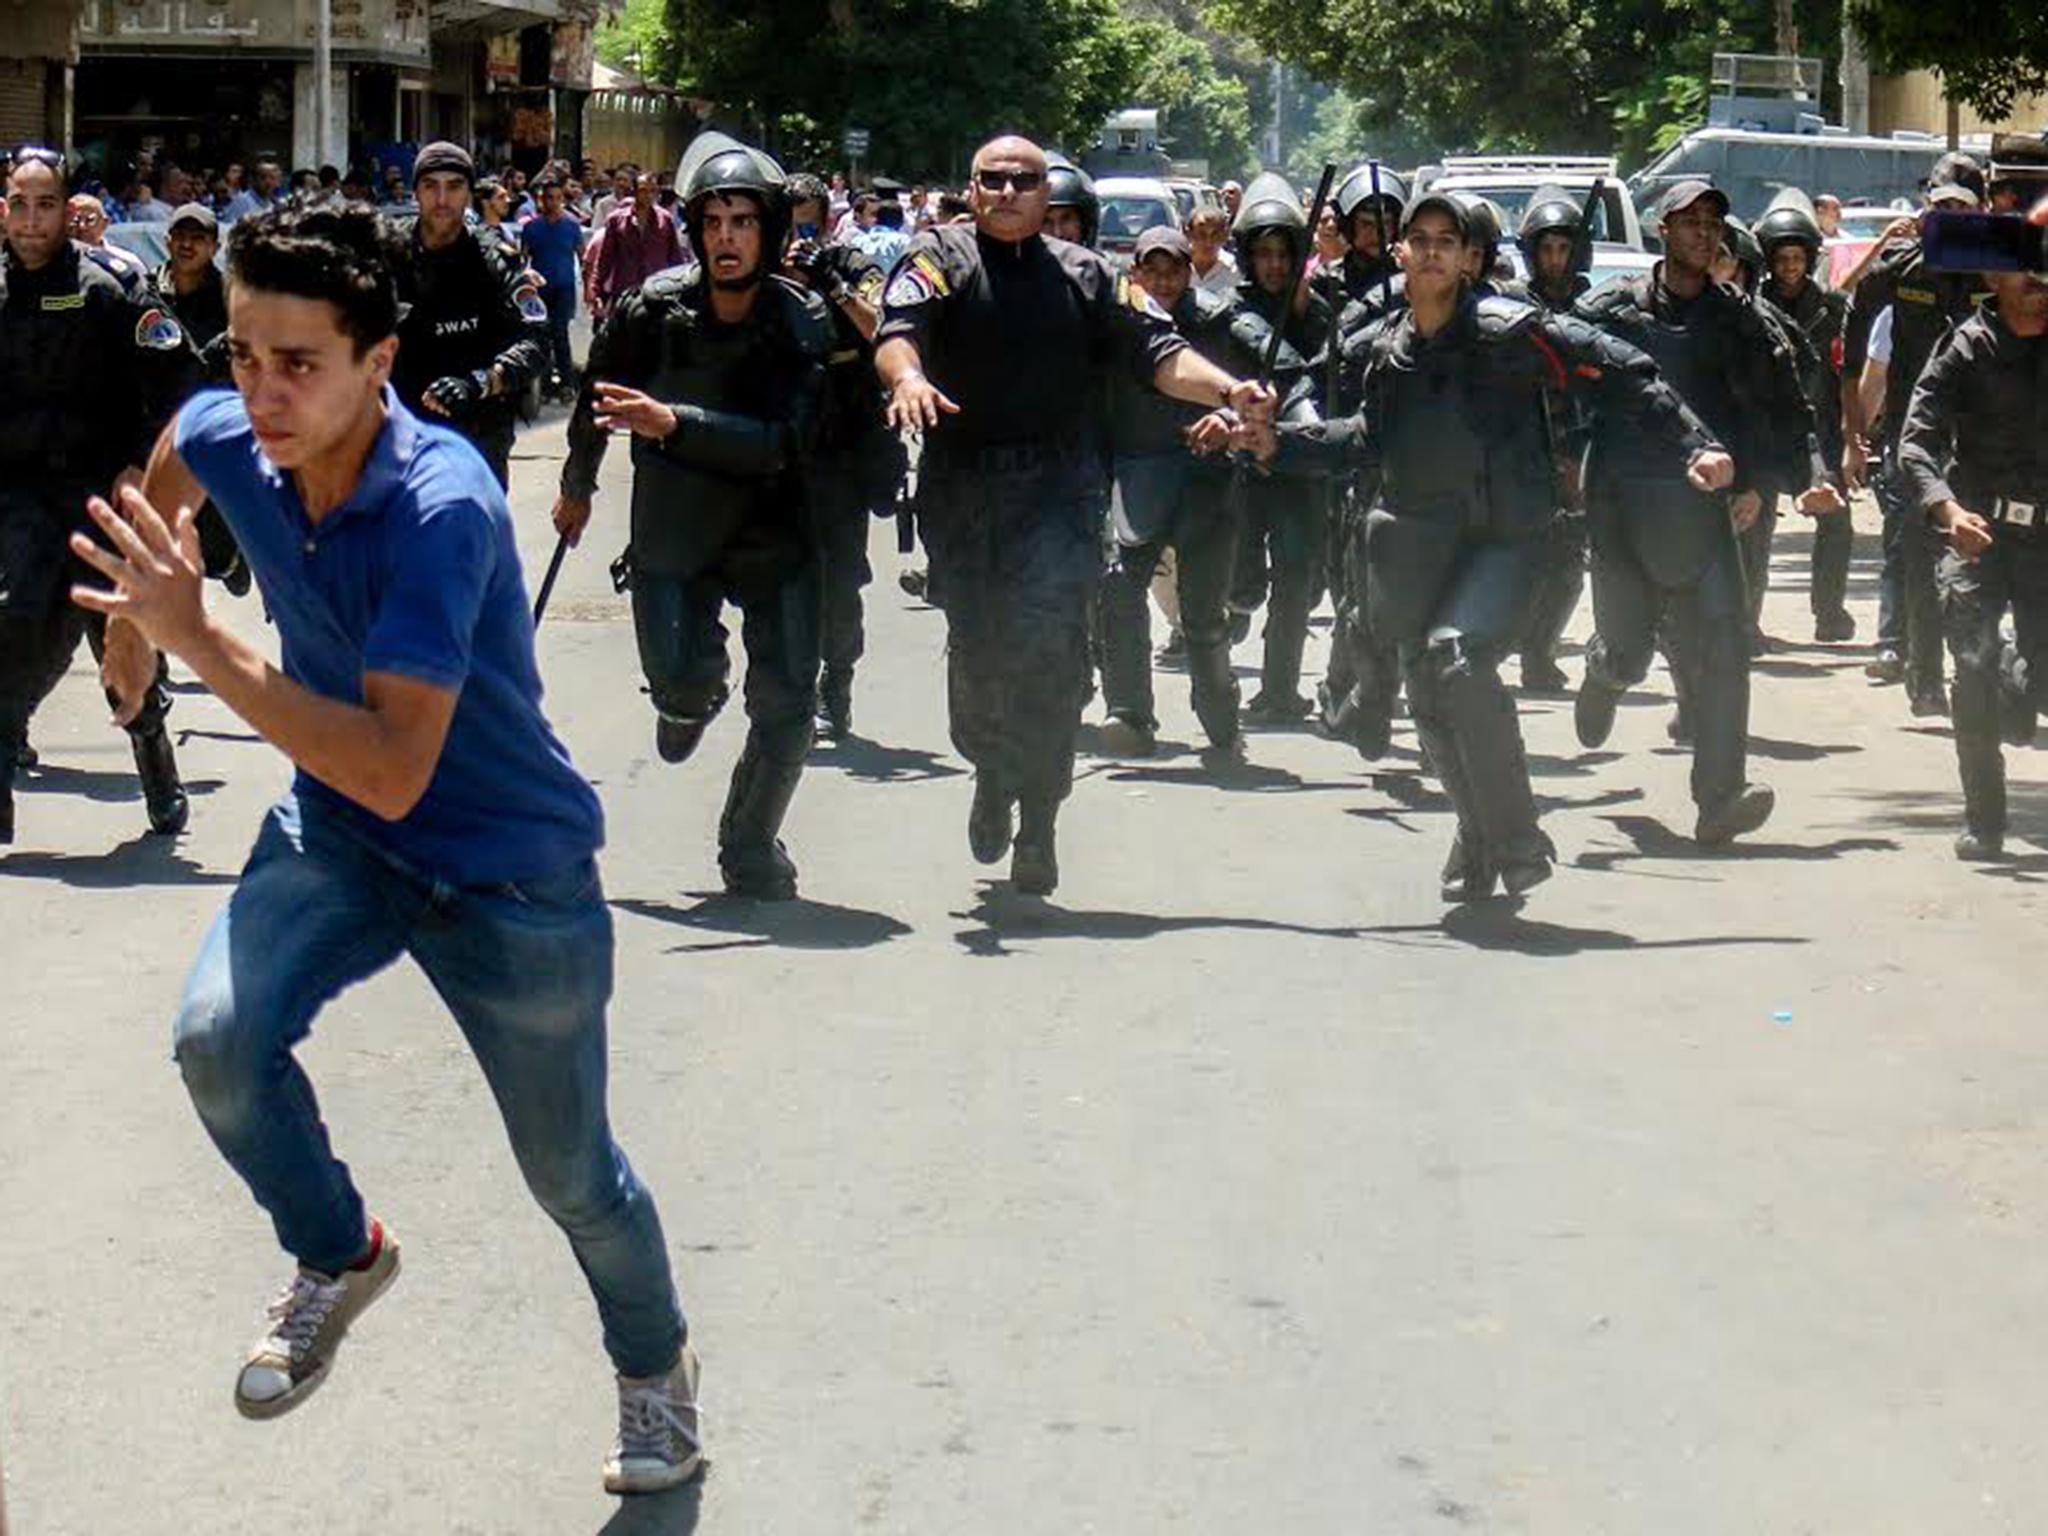 Egyptian security forces chase a student who was protesting after the cancellation of exams, in front of the Ministry of Education